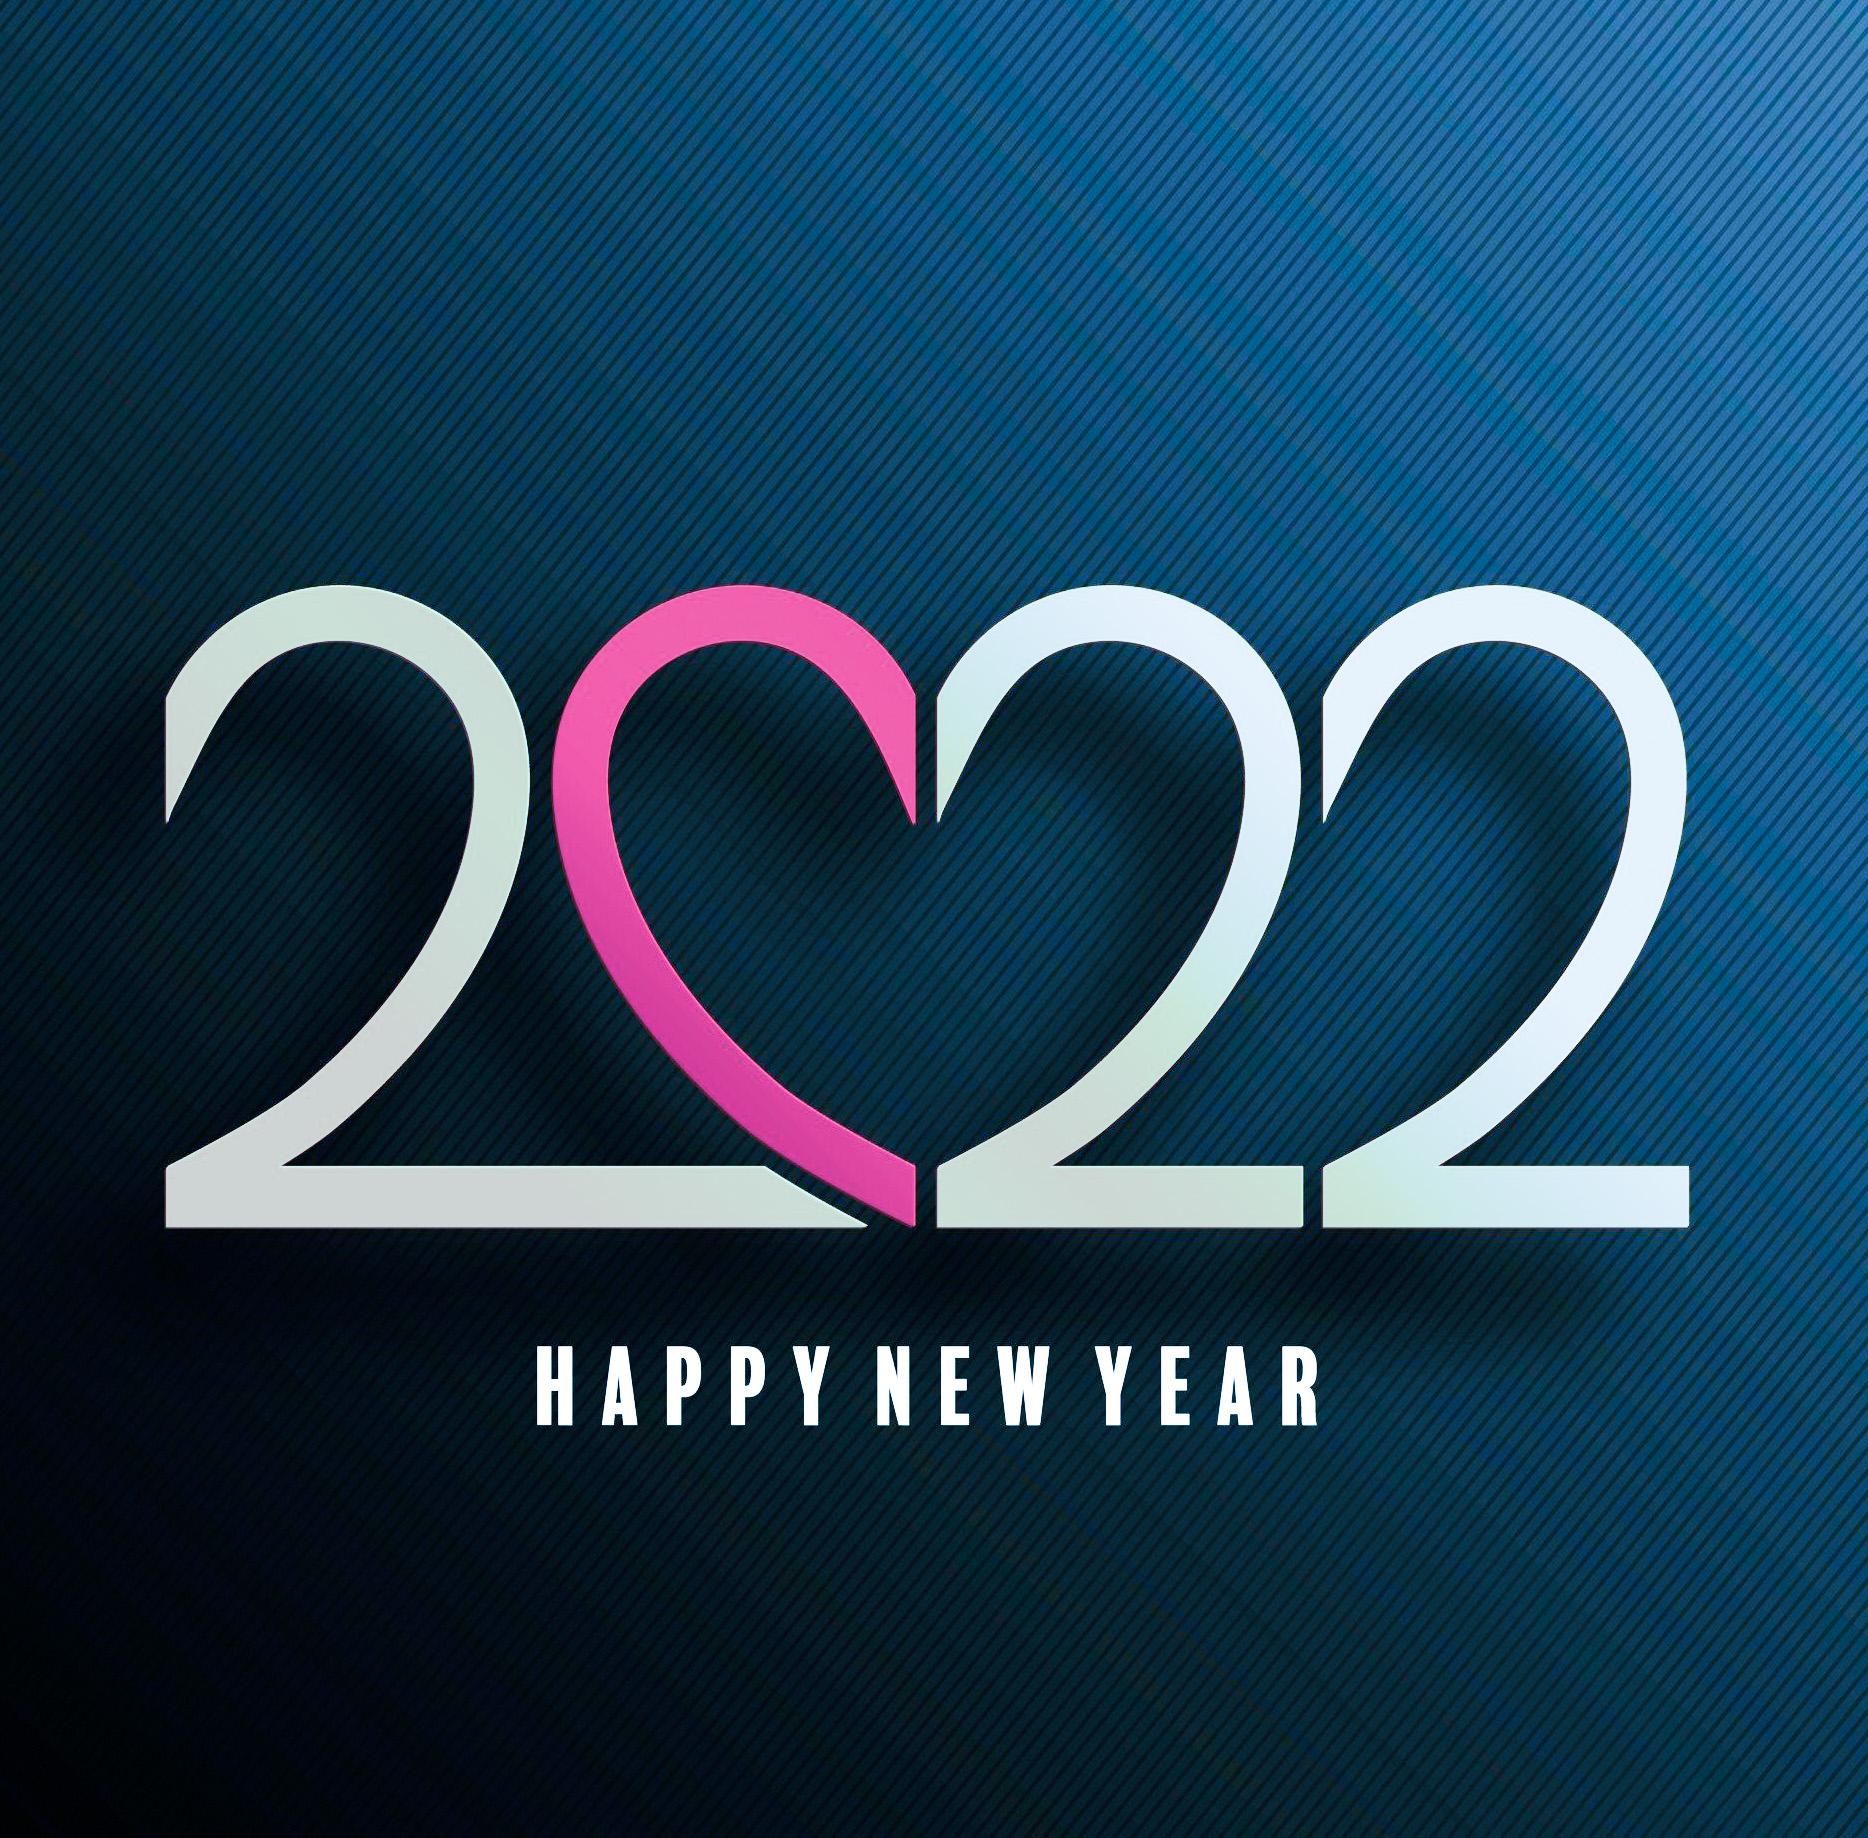 Happy New Year 2022 Images, Picture, Photos, Wallpaper, Pic 